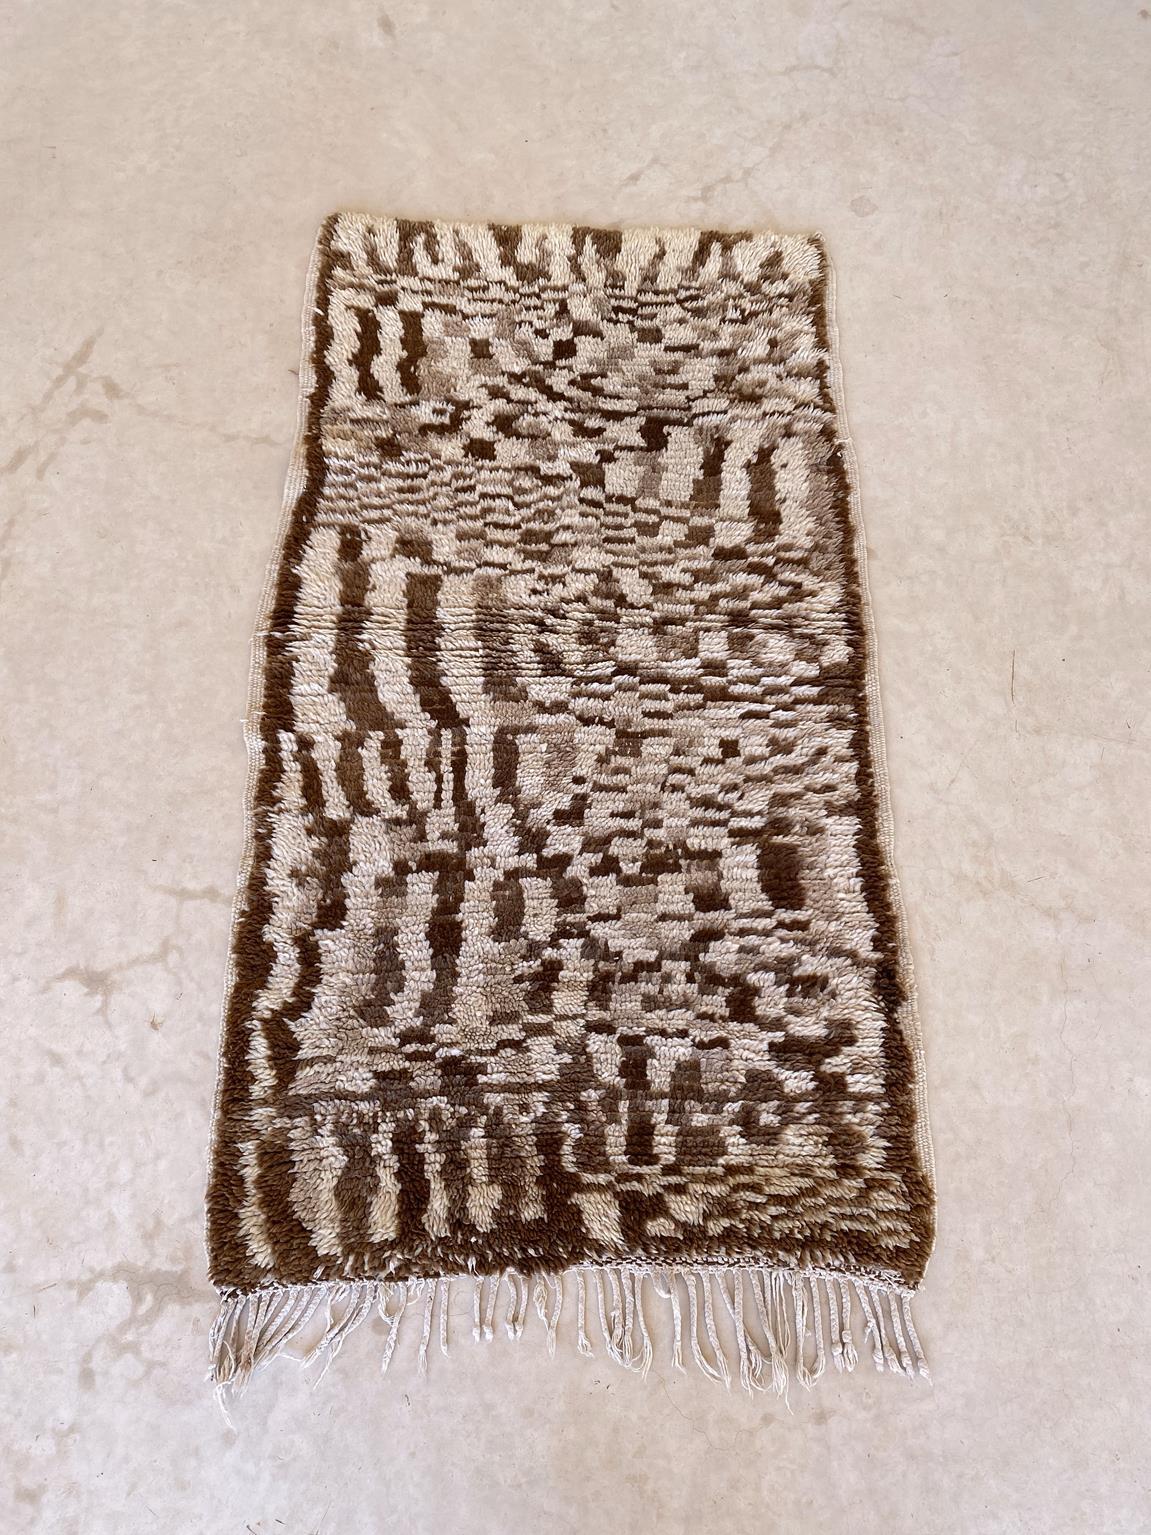 I selected this lovely rug from piles of carpets as I have always loved a good vintage Azilal rug in the beige and brownish tones! This one shows warm colors and a dizzy accumulation of unregular rectangles, a pattern that gives so much rhythm to